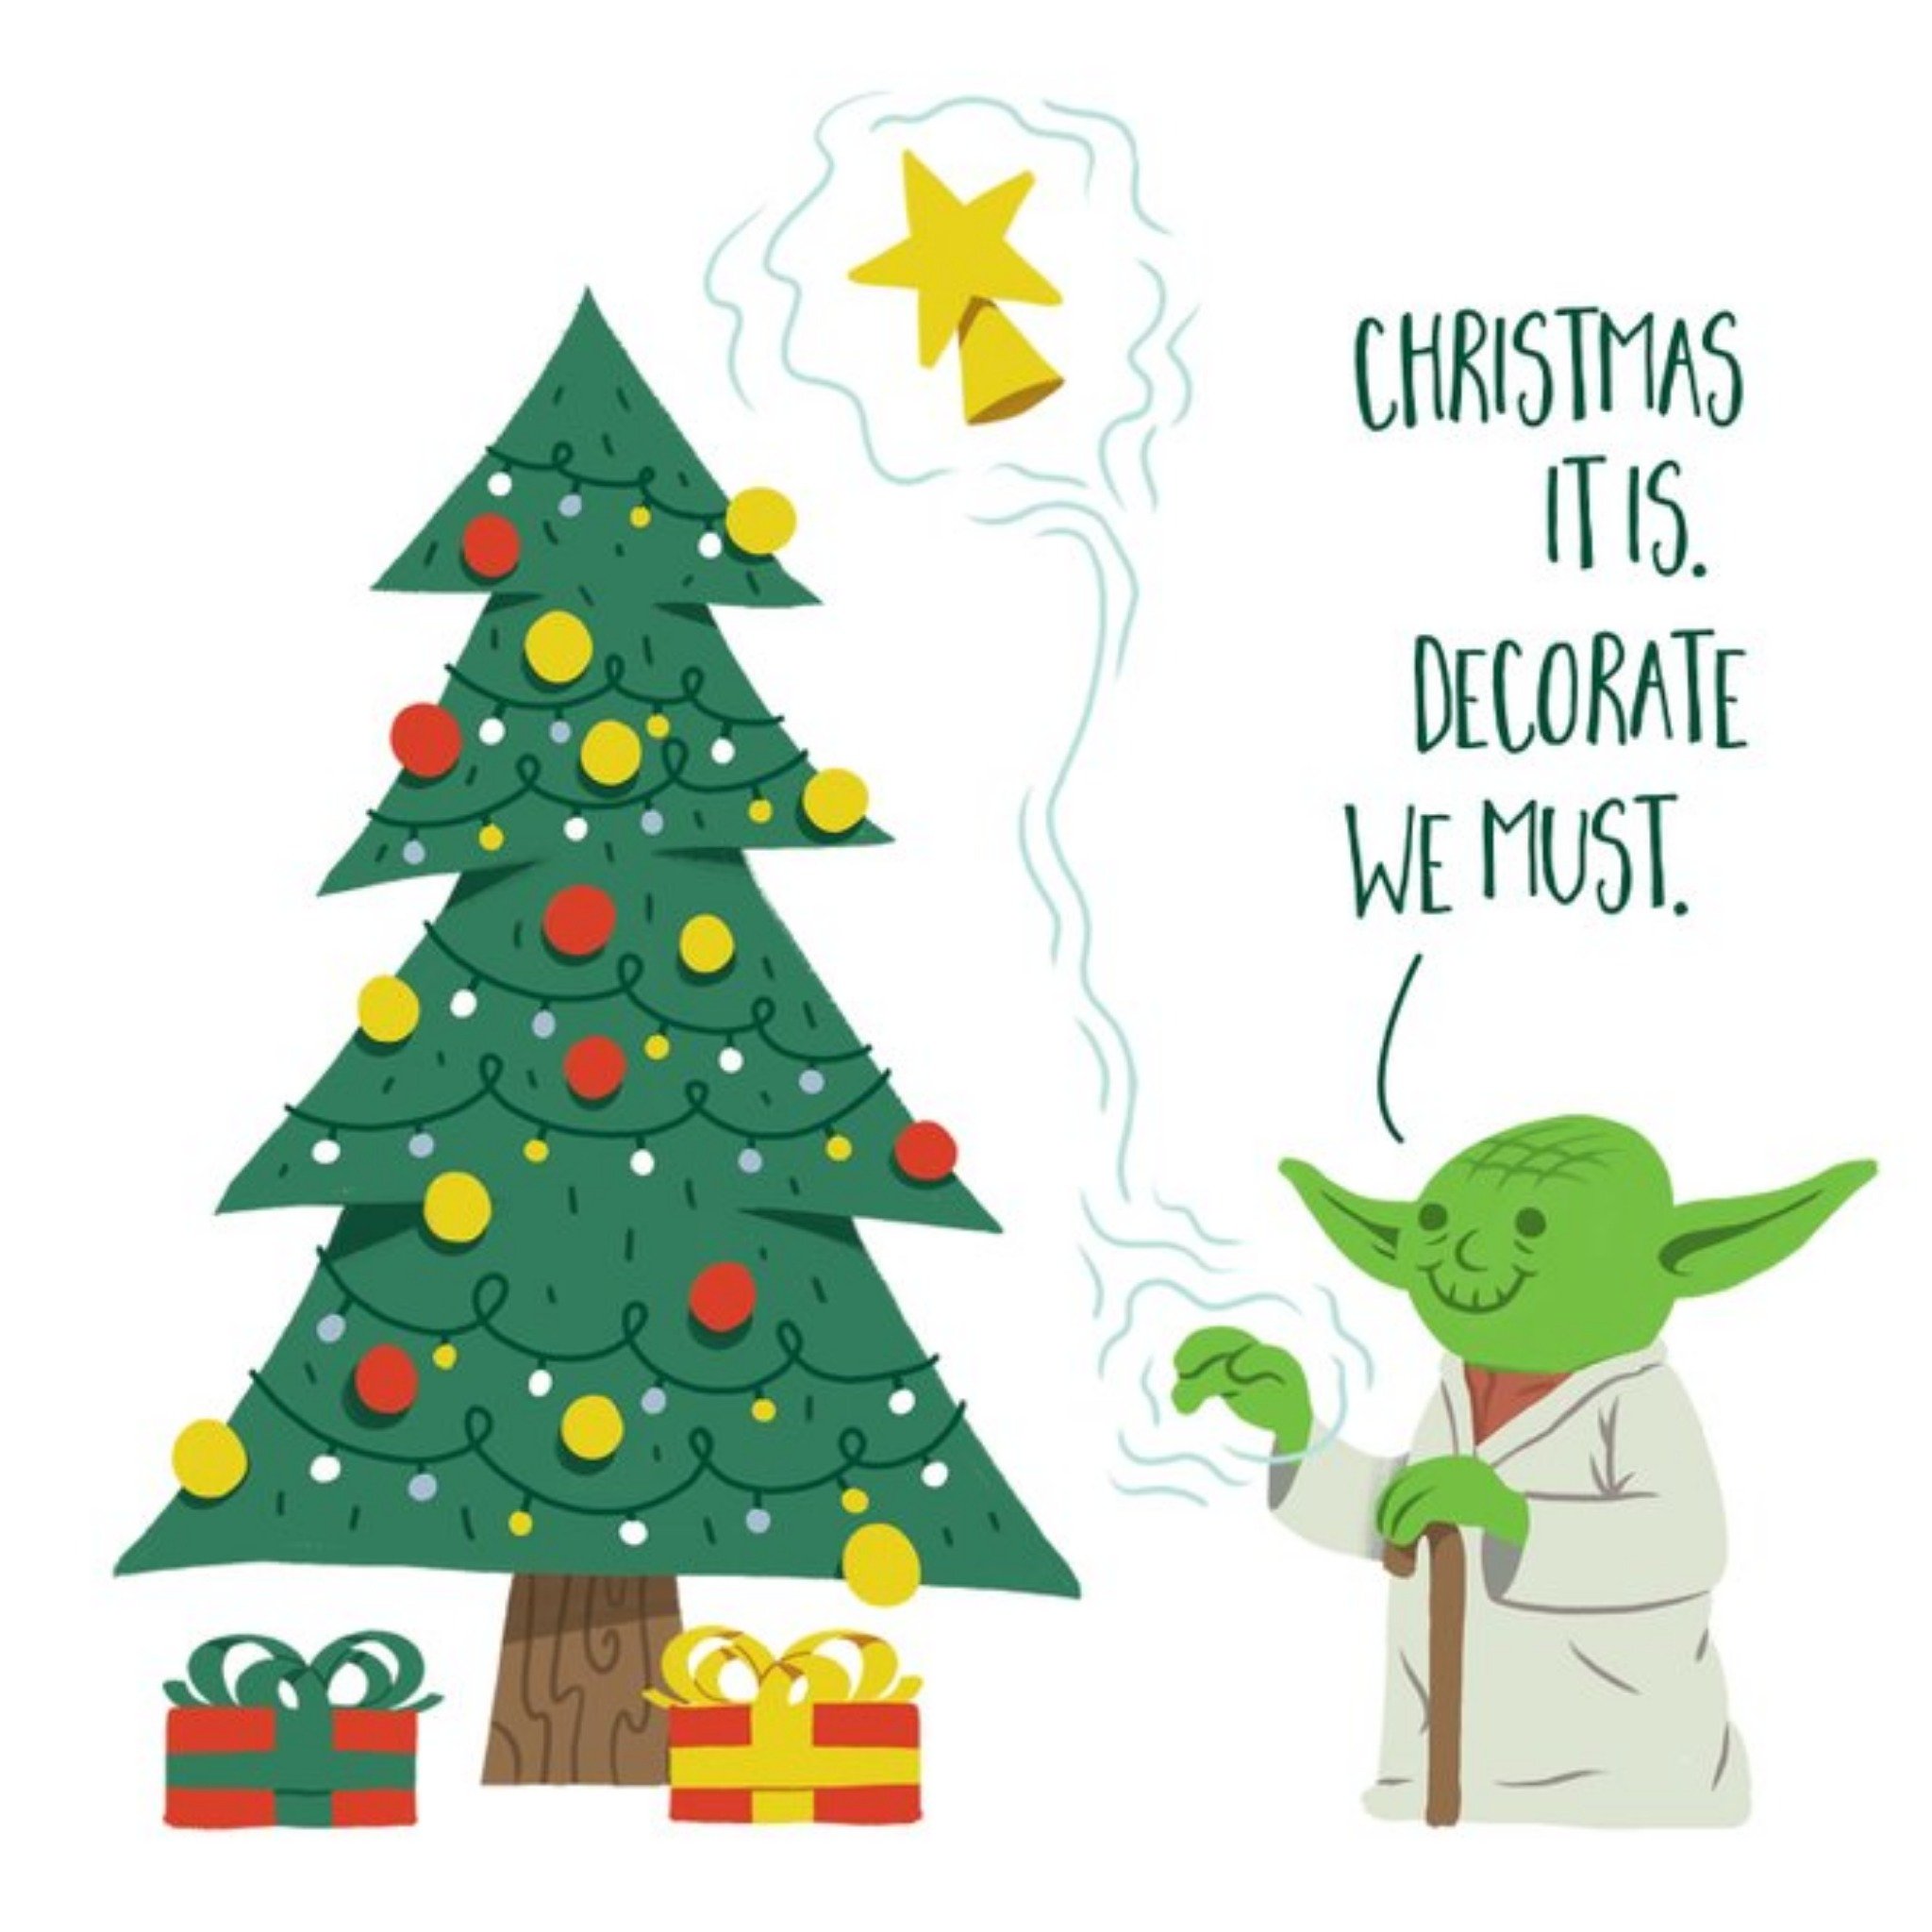 Disney Star Wars Decorate We Must Yoda Christmas Card, Square